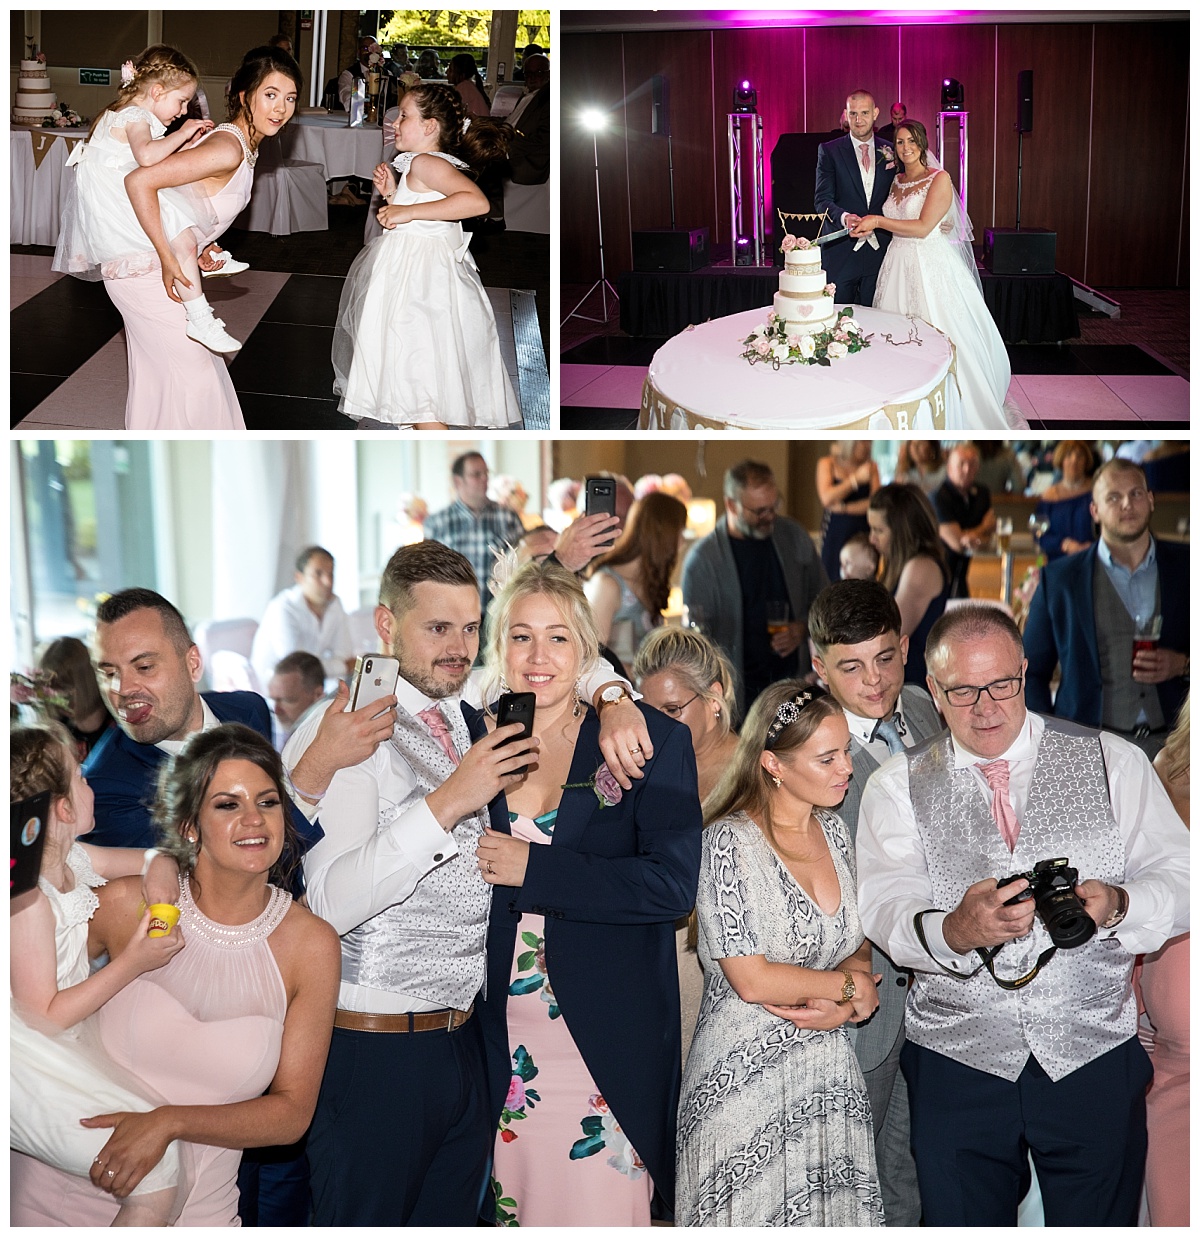 Wedding Photography Manchester - Melissa and Stuarts Mere Golf Resort And Spa Wedding Day 99